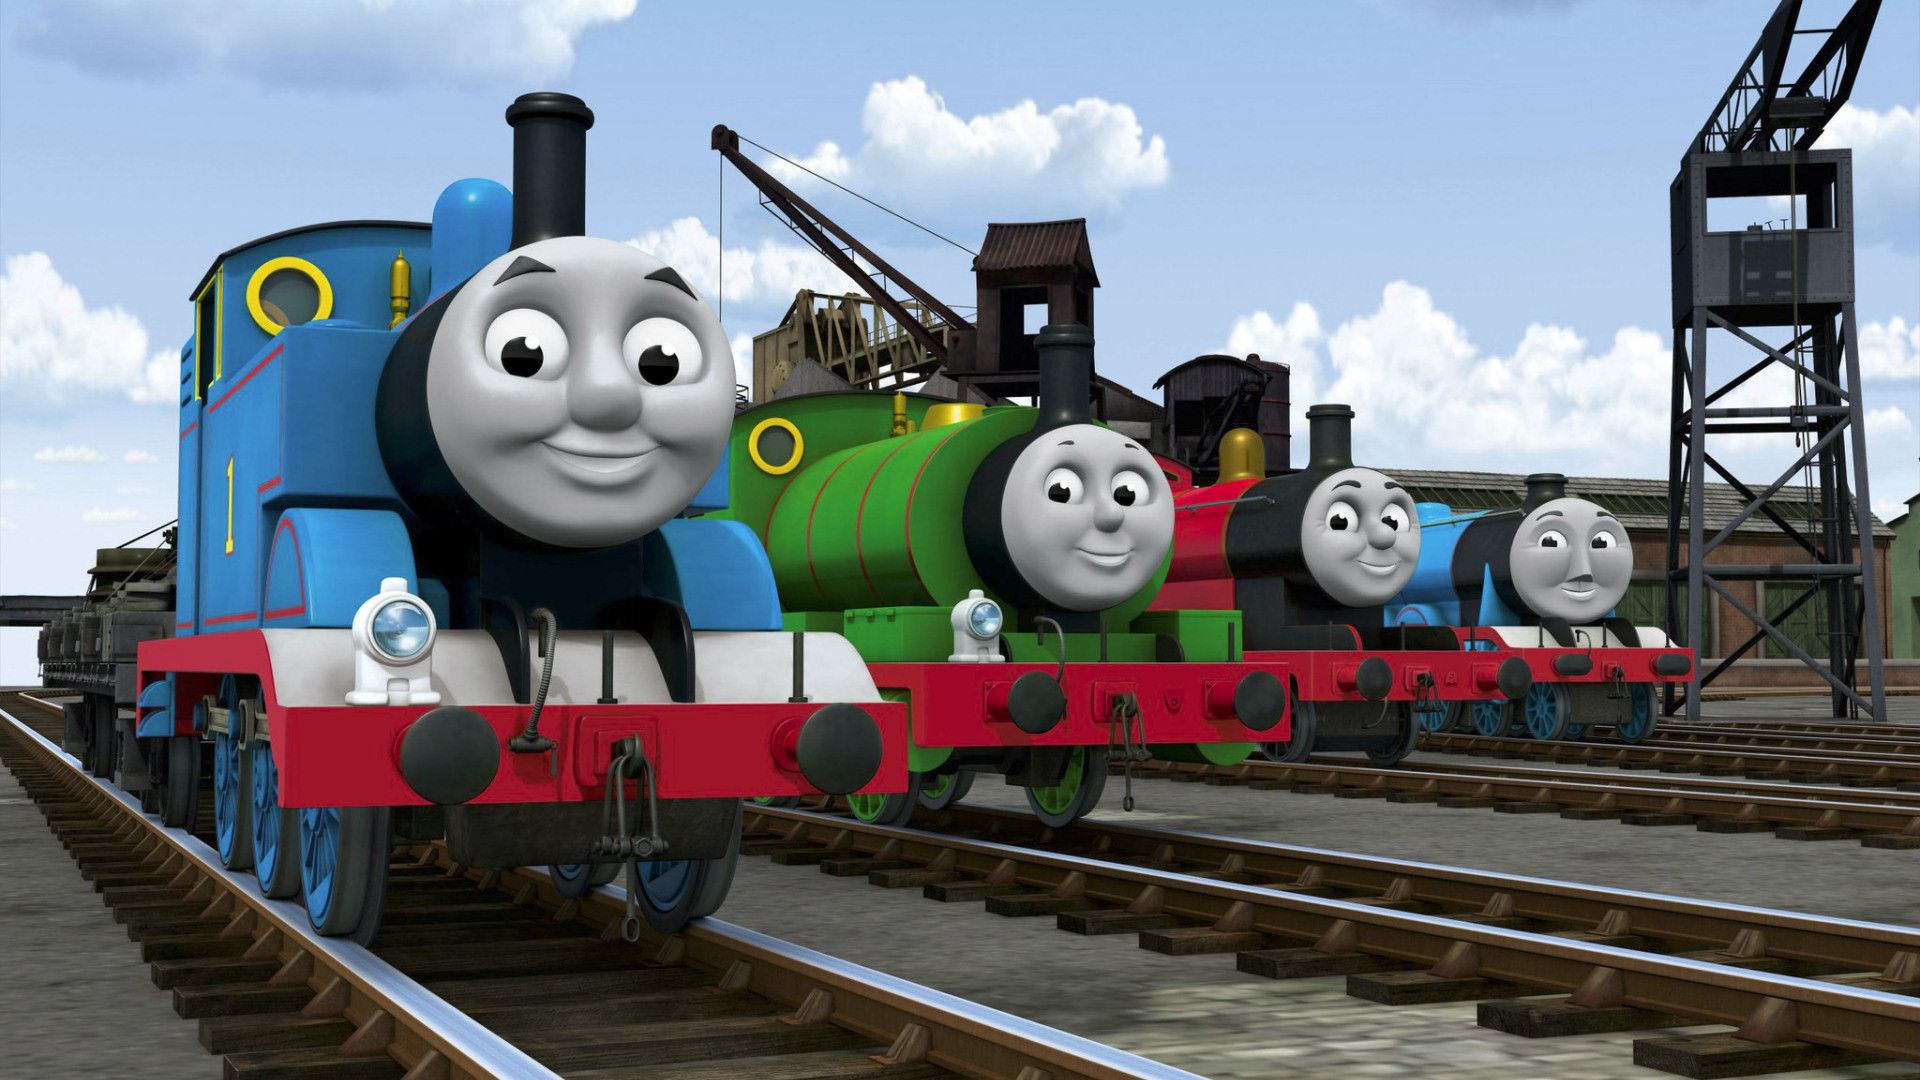 Thomas and Friends 1080P 2K 4K 5K HD wallpapers free download  Wallpaper  Flare